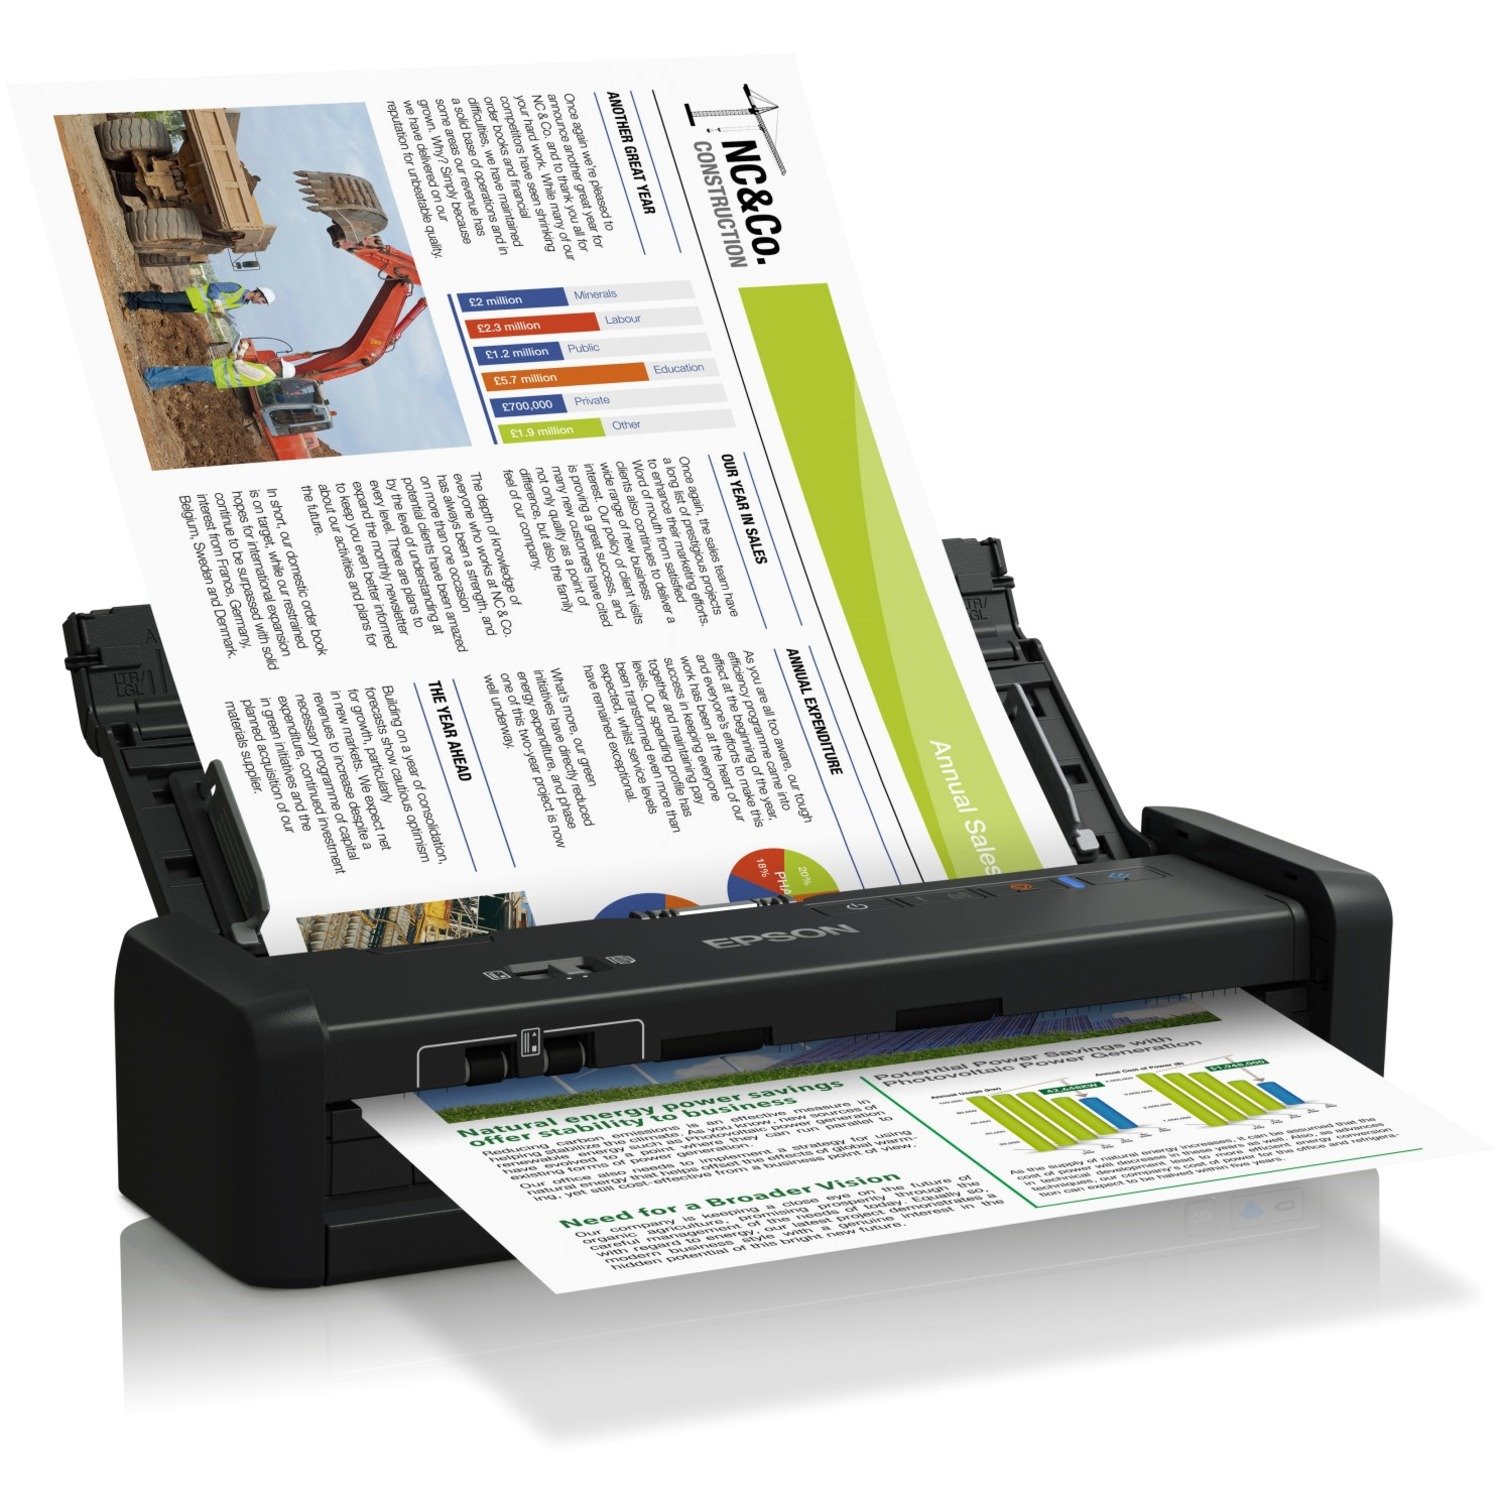 Epson WorkForce DS-360W Sheetfed Scanner - 600 x 600 dpi Optical